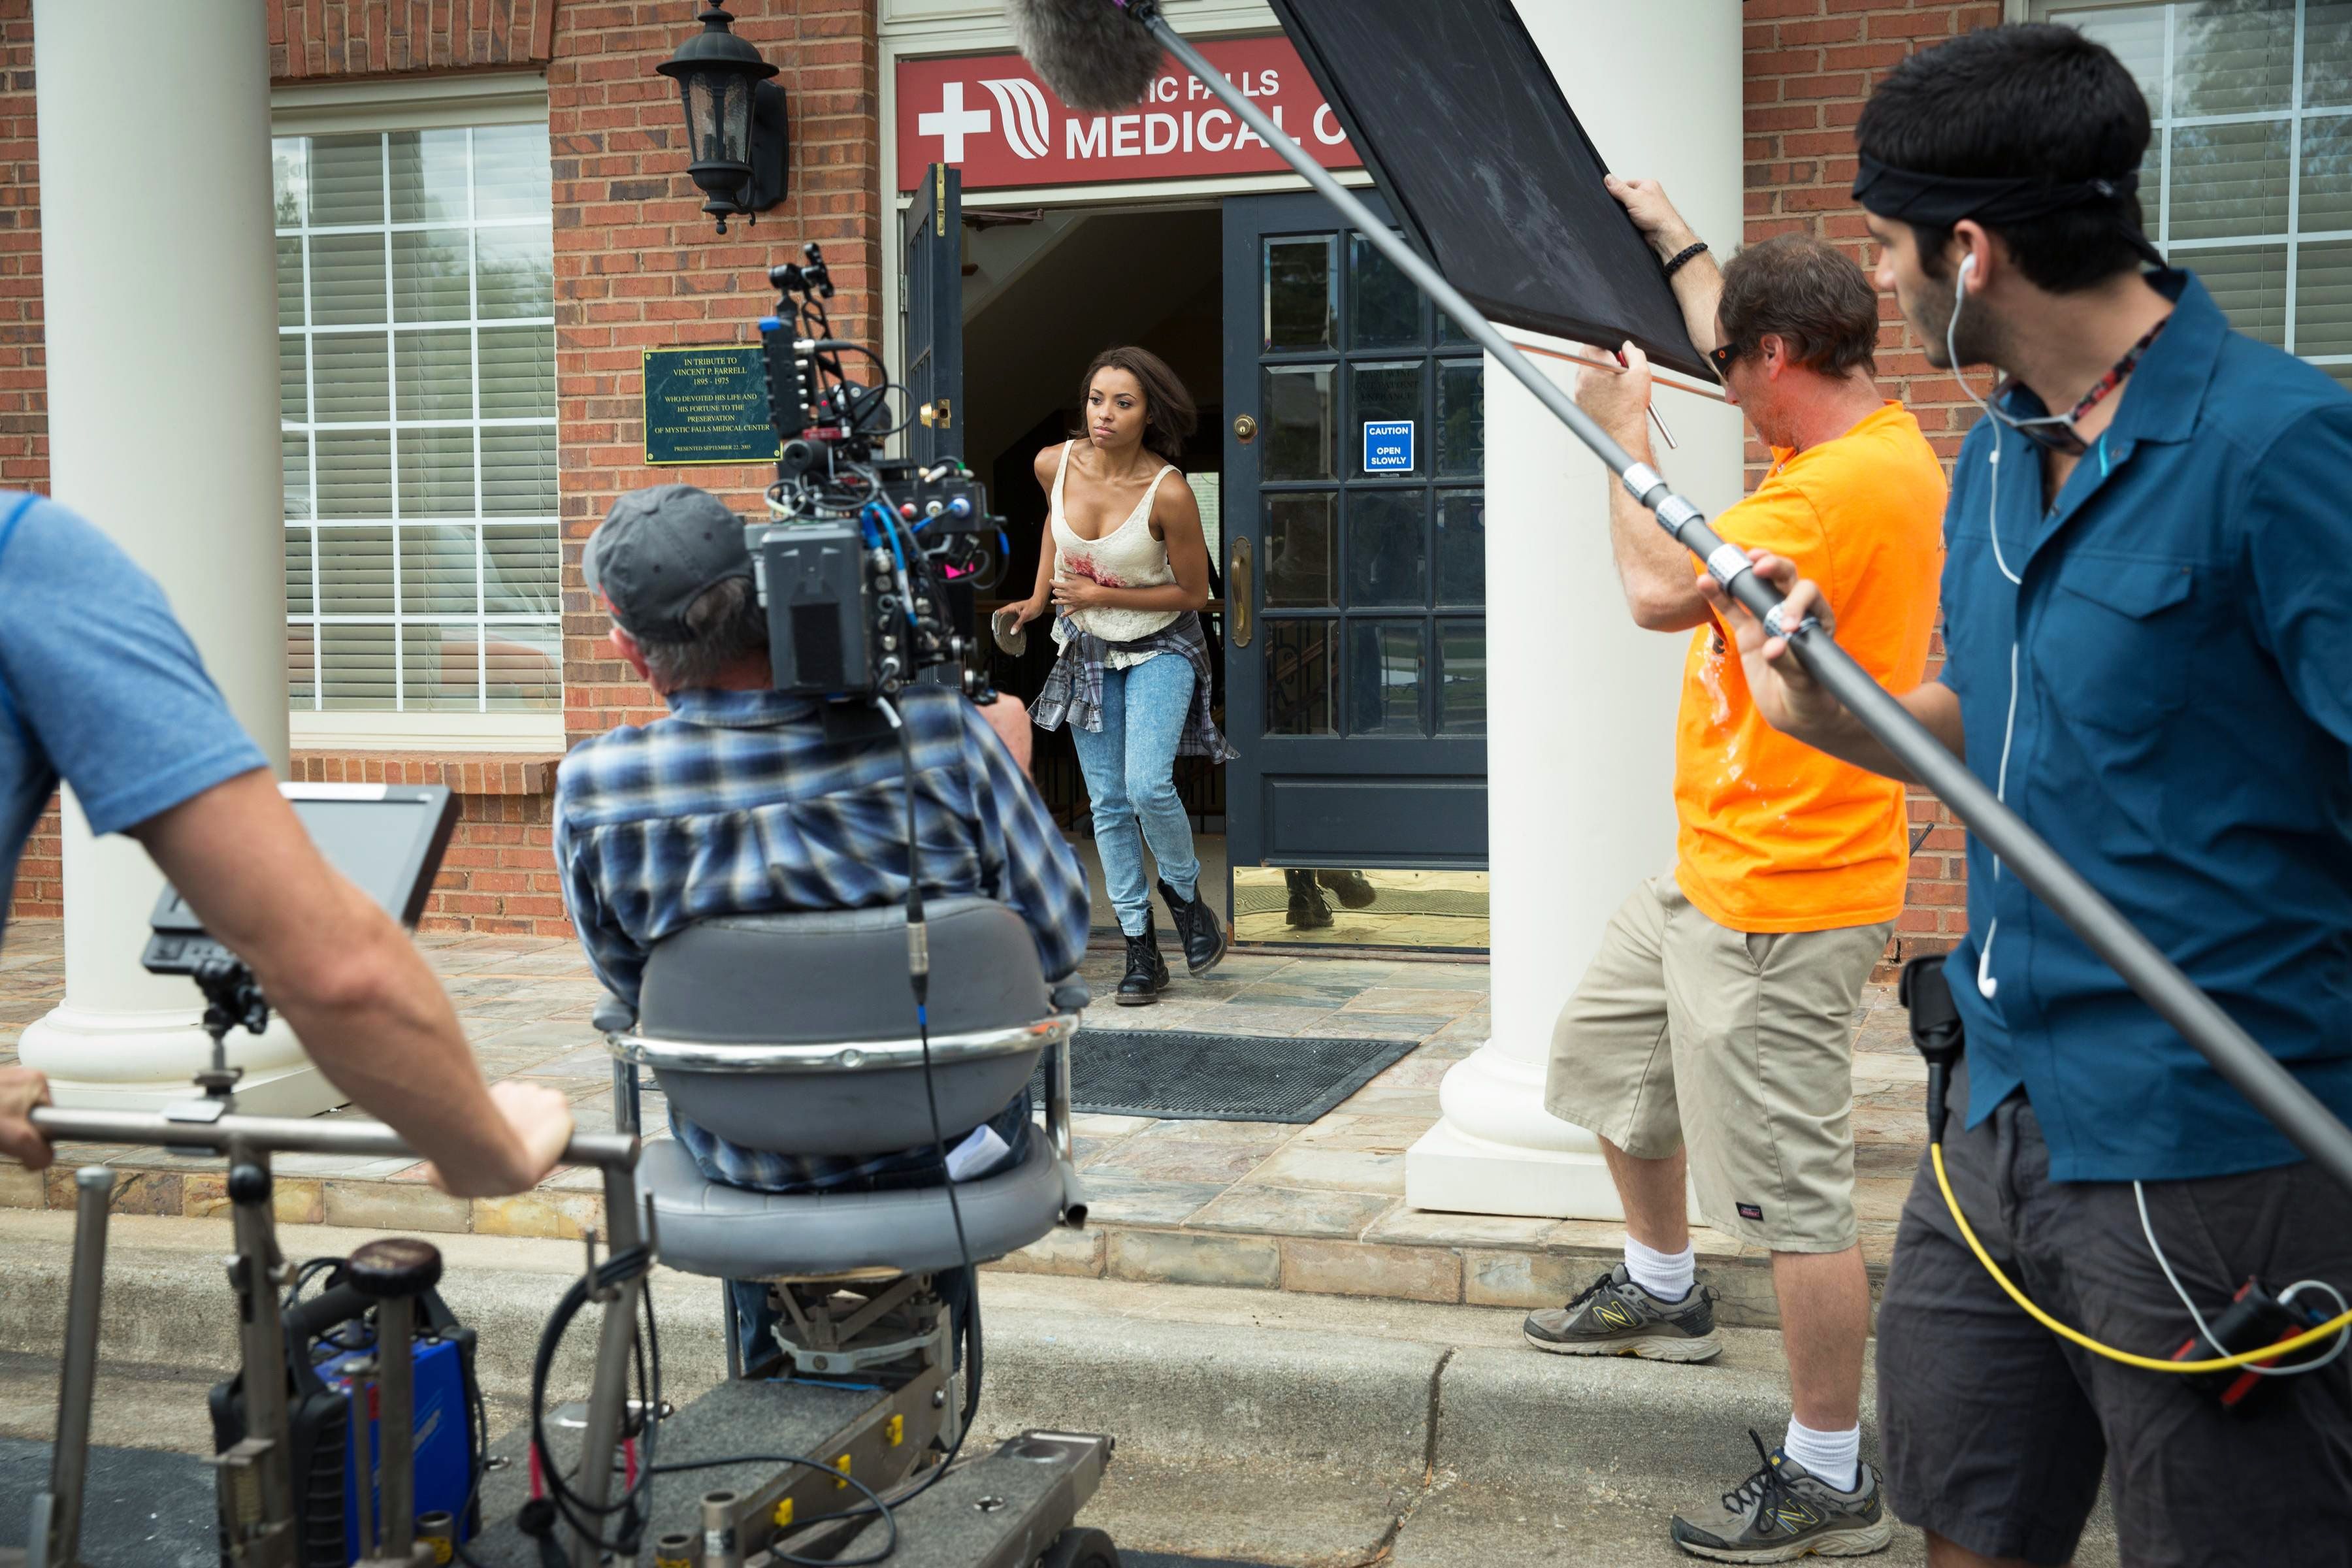 The screw filming an episode of The Vampire Diaries with the Mystic Falls Hospital.